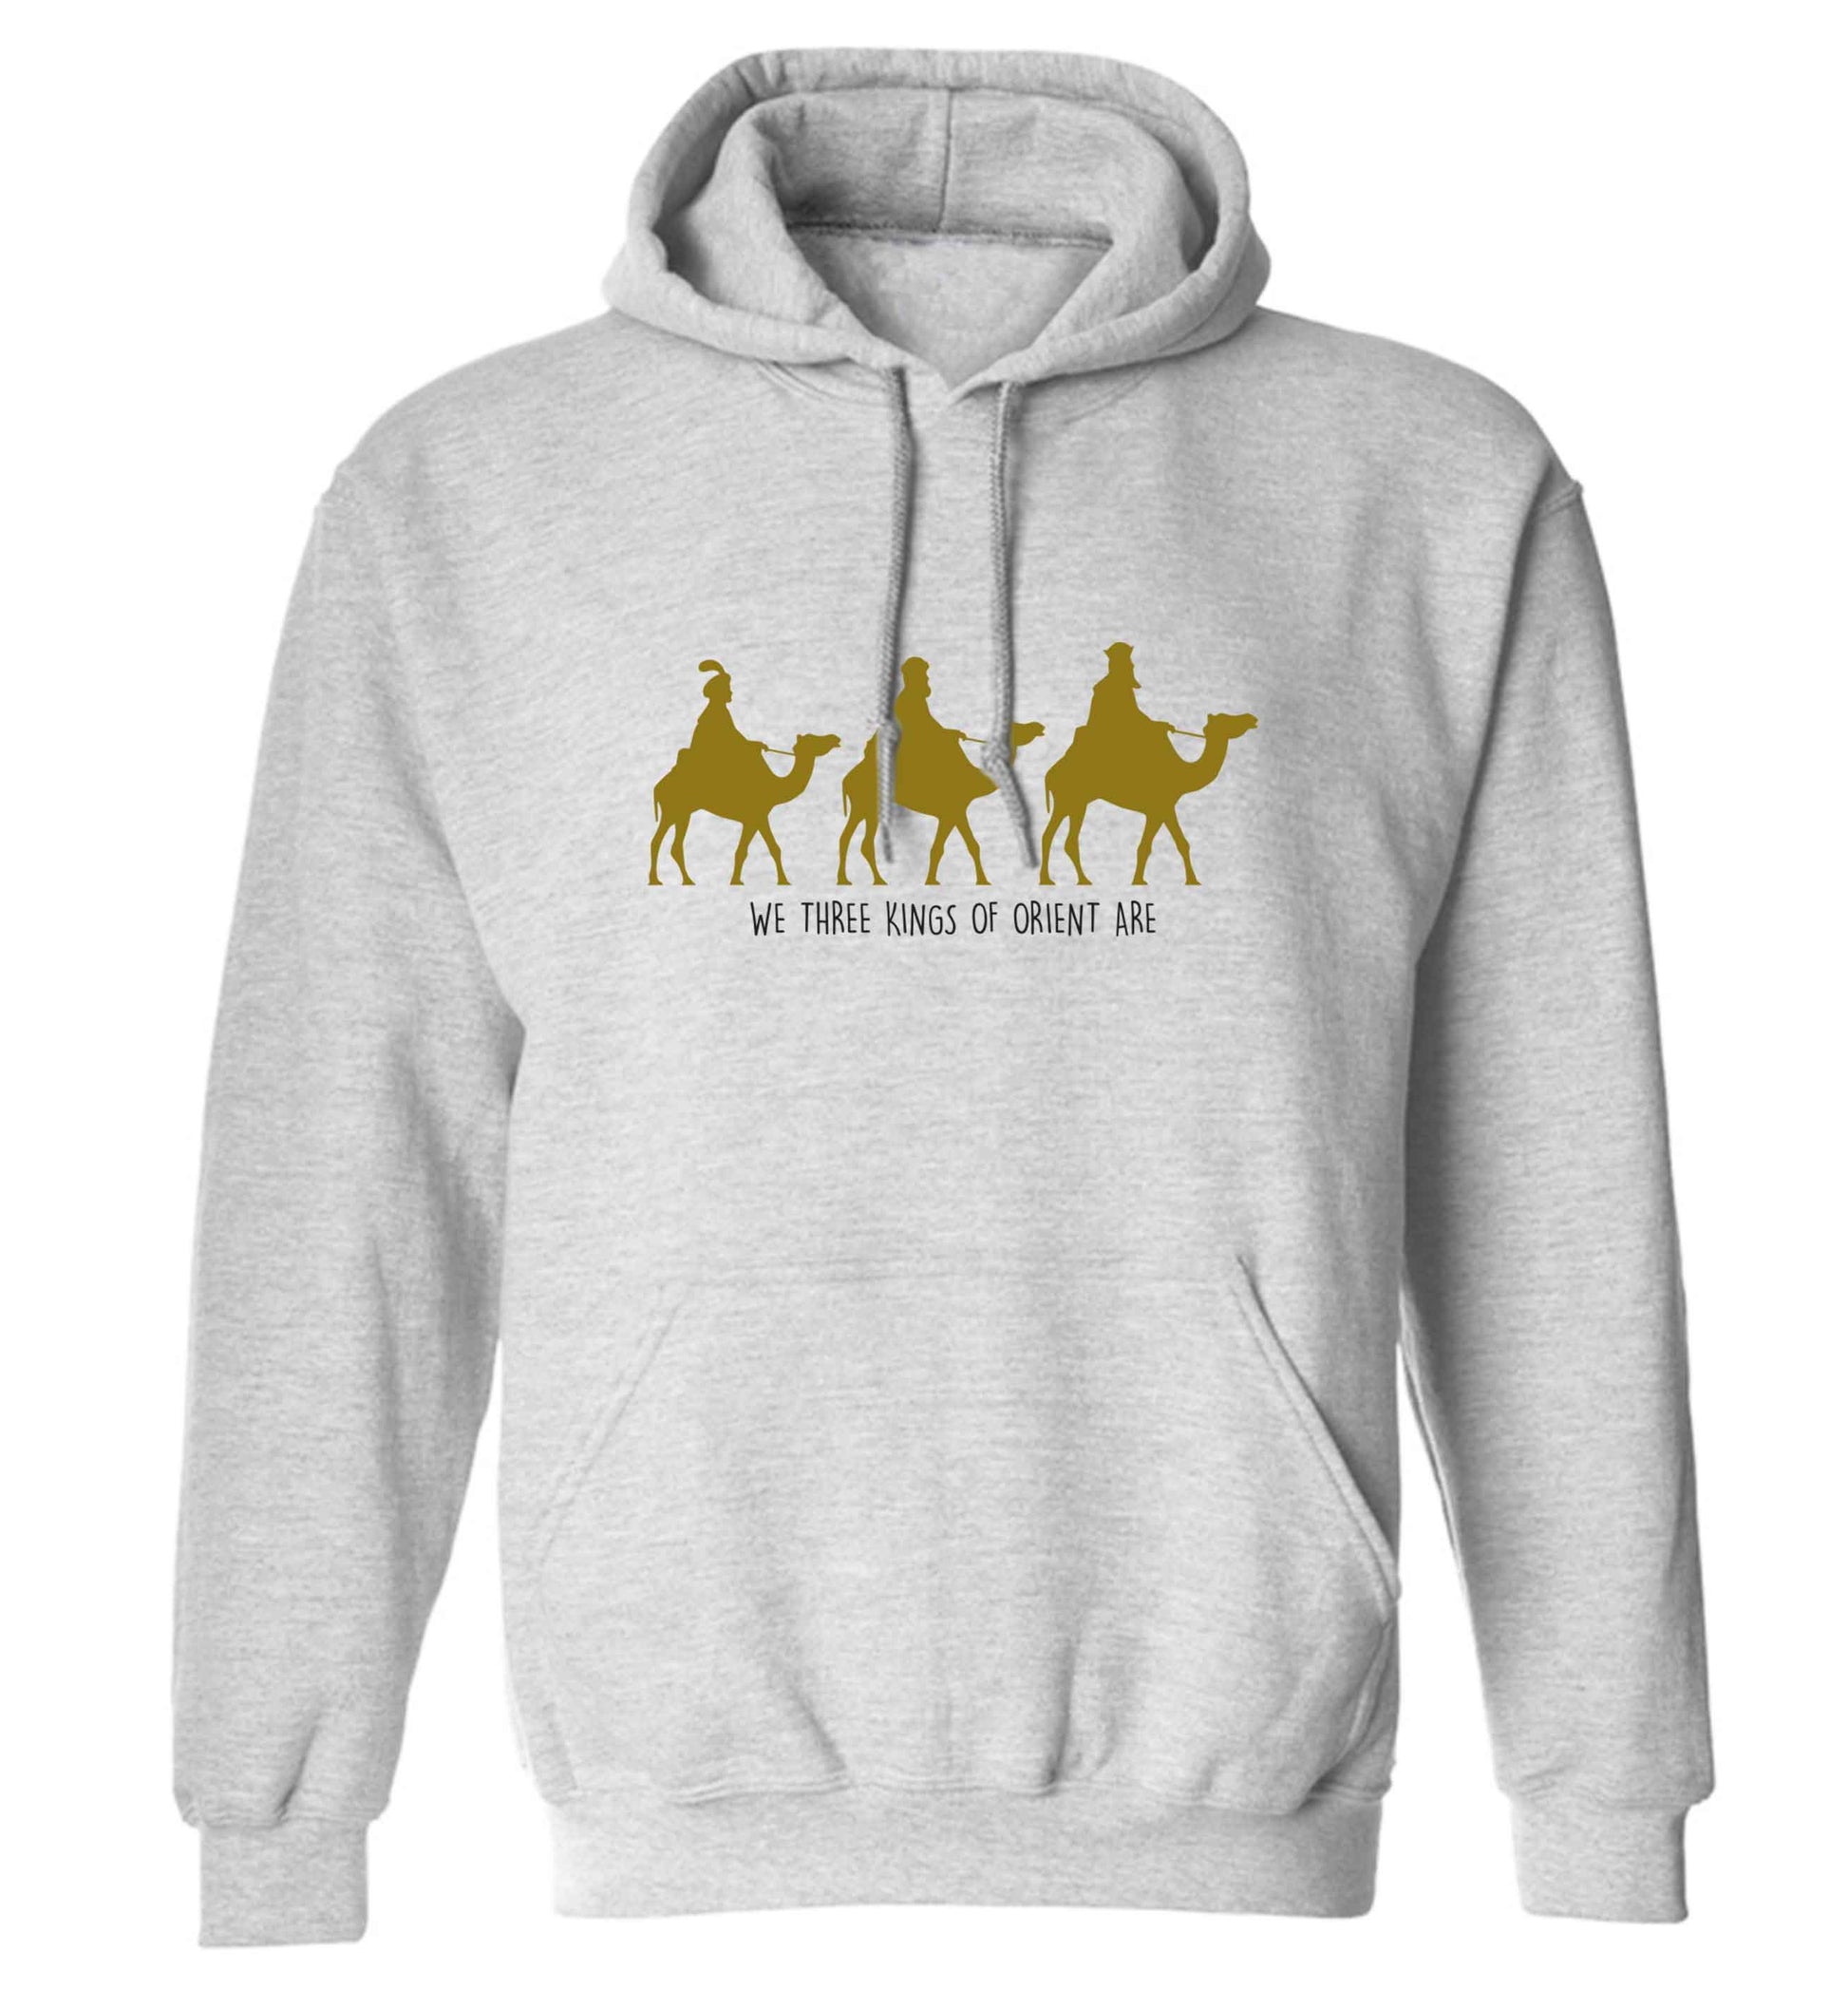 We three kings of orient are adults unisex grey hoodie 2XL